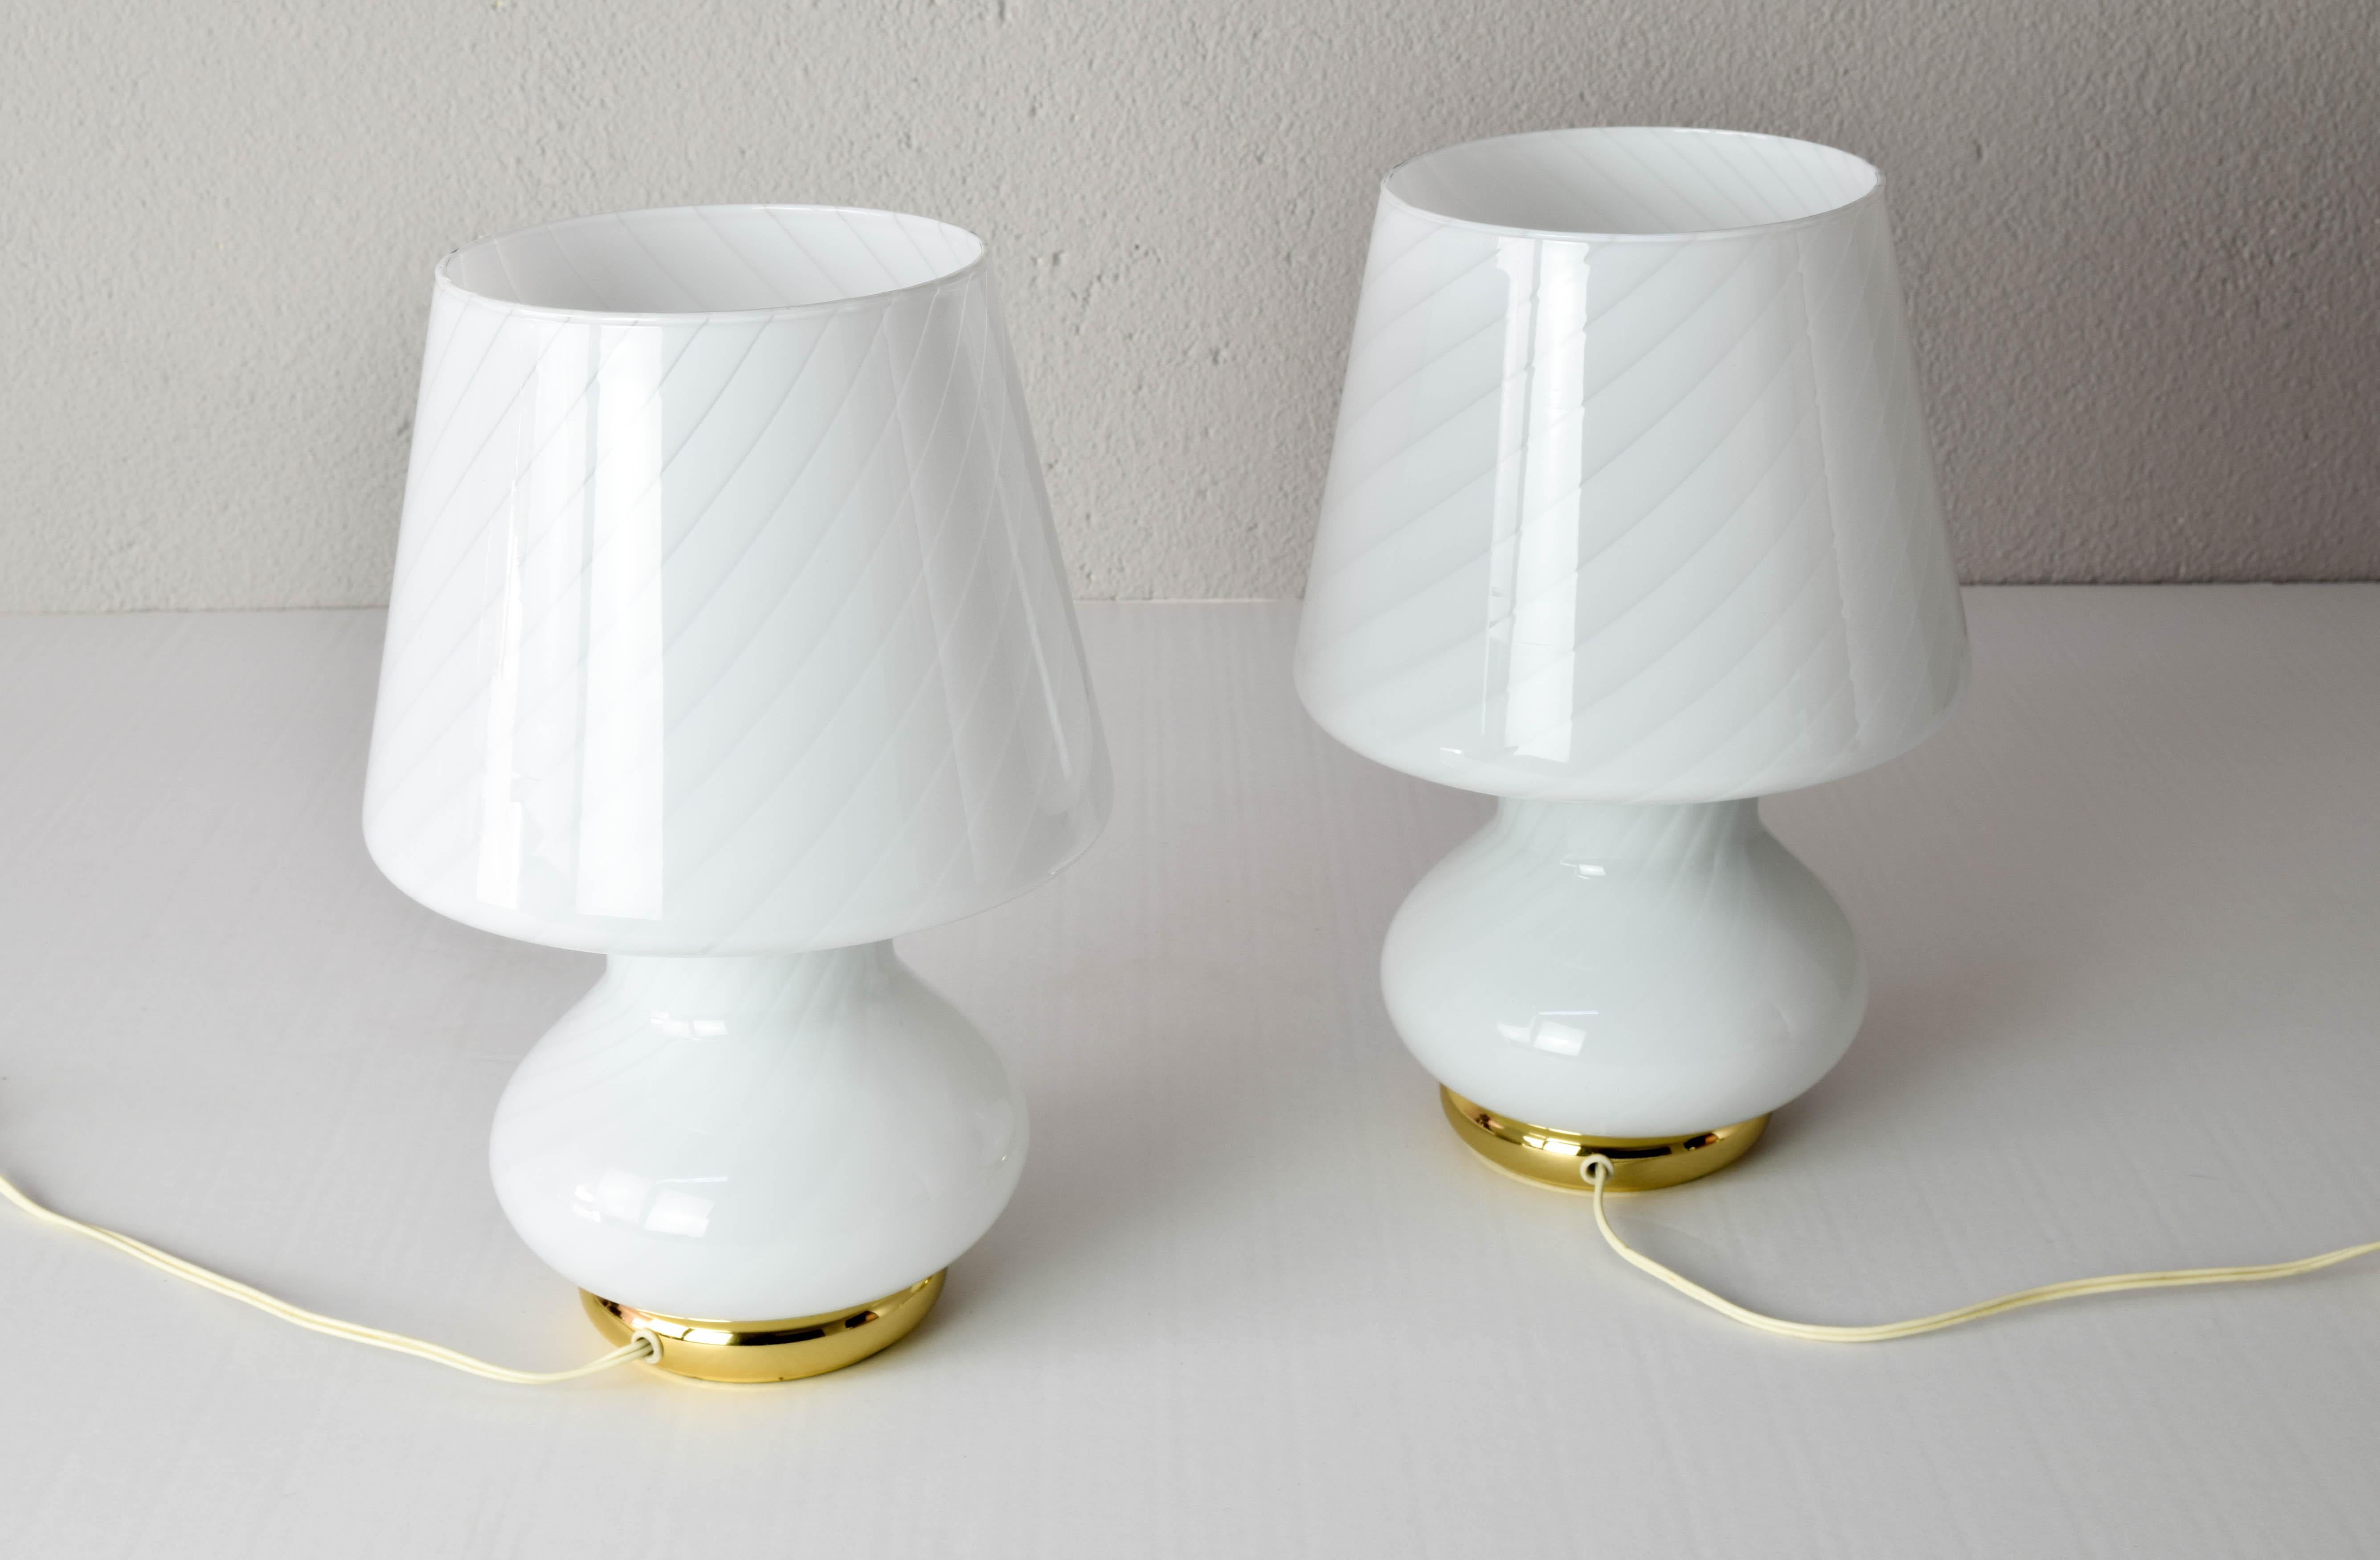 20th Century Pair of MidCentury Modern Murano Glass Mushroom Table Lamps for Vetri Italy 1960 For Sale